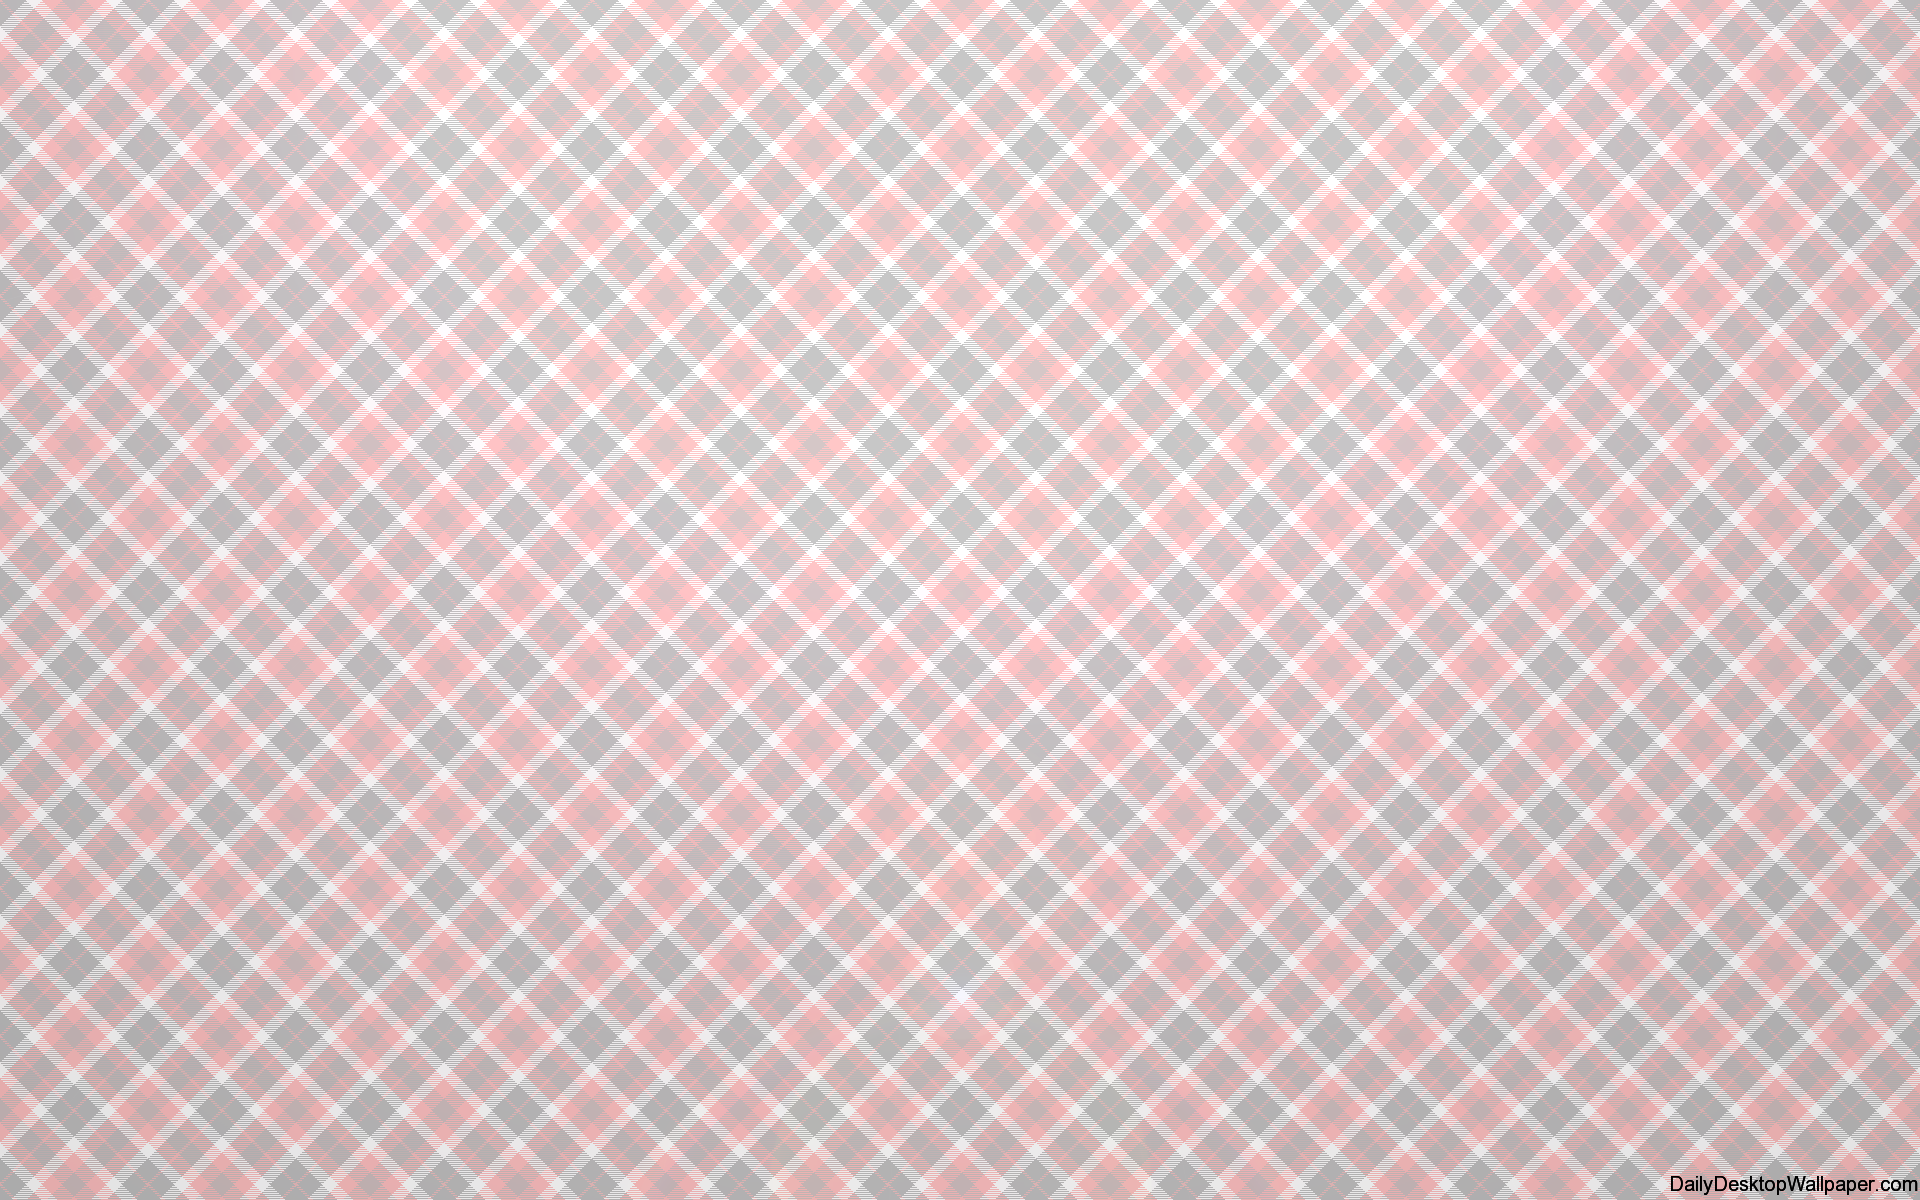 Chequered Material - HD Wallpapers